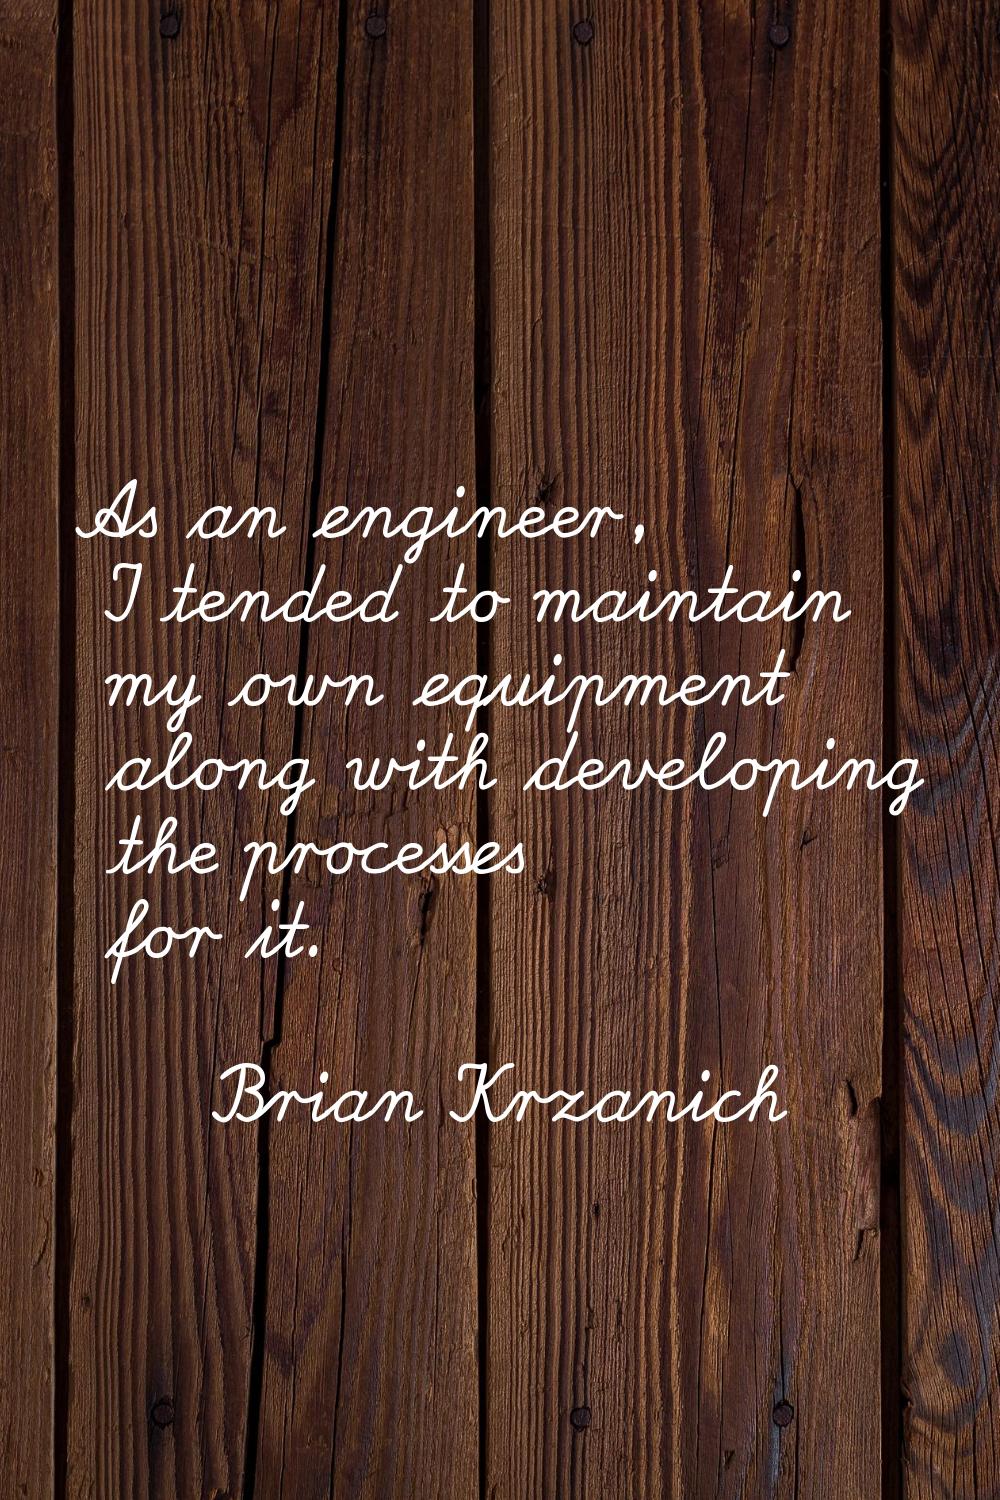 As an engineer, I tended to maintain my own equipment along with developing the processes for it.